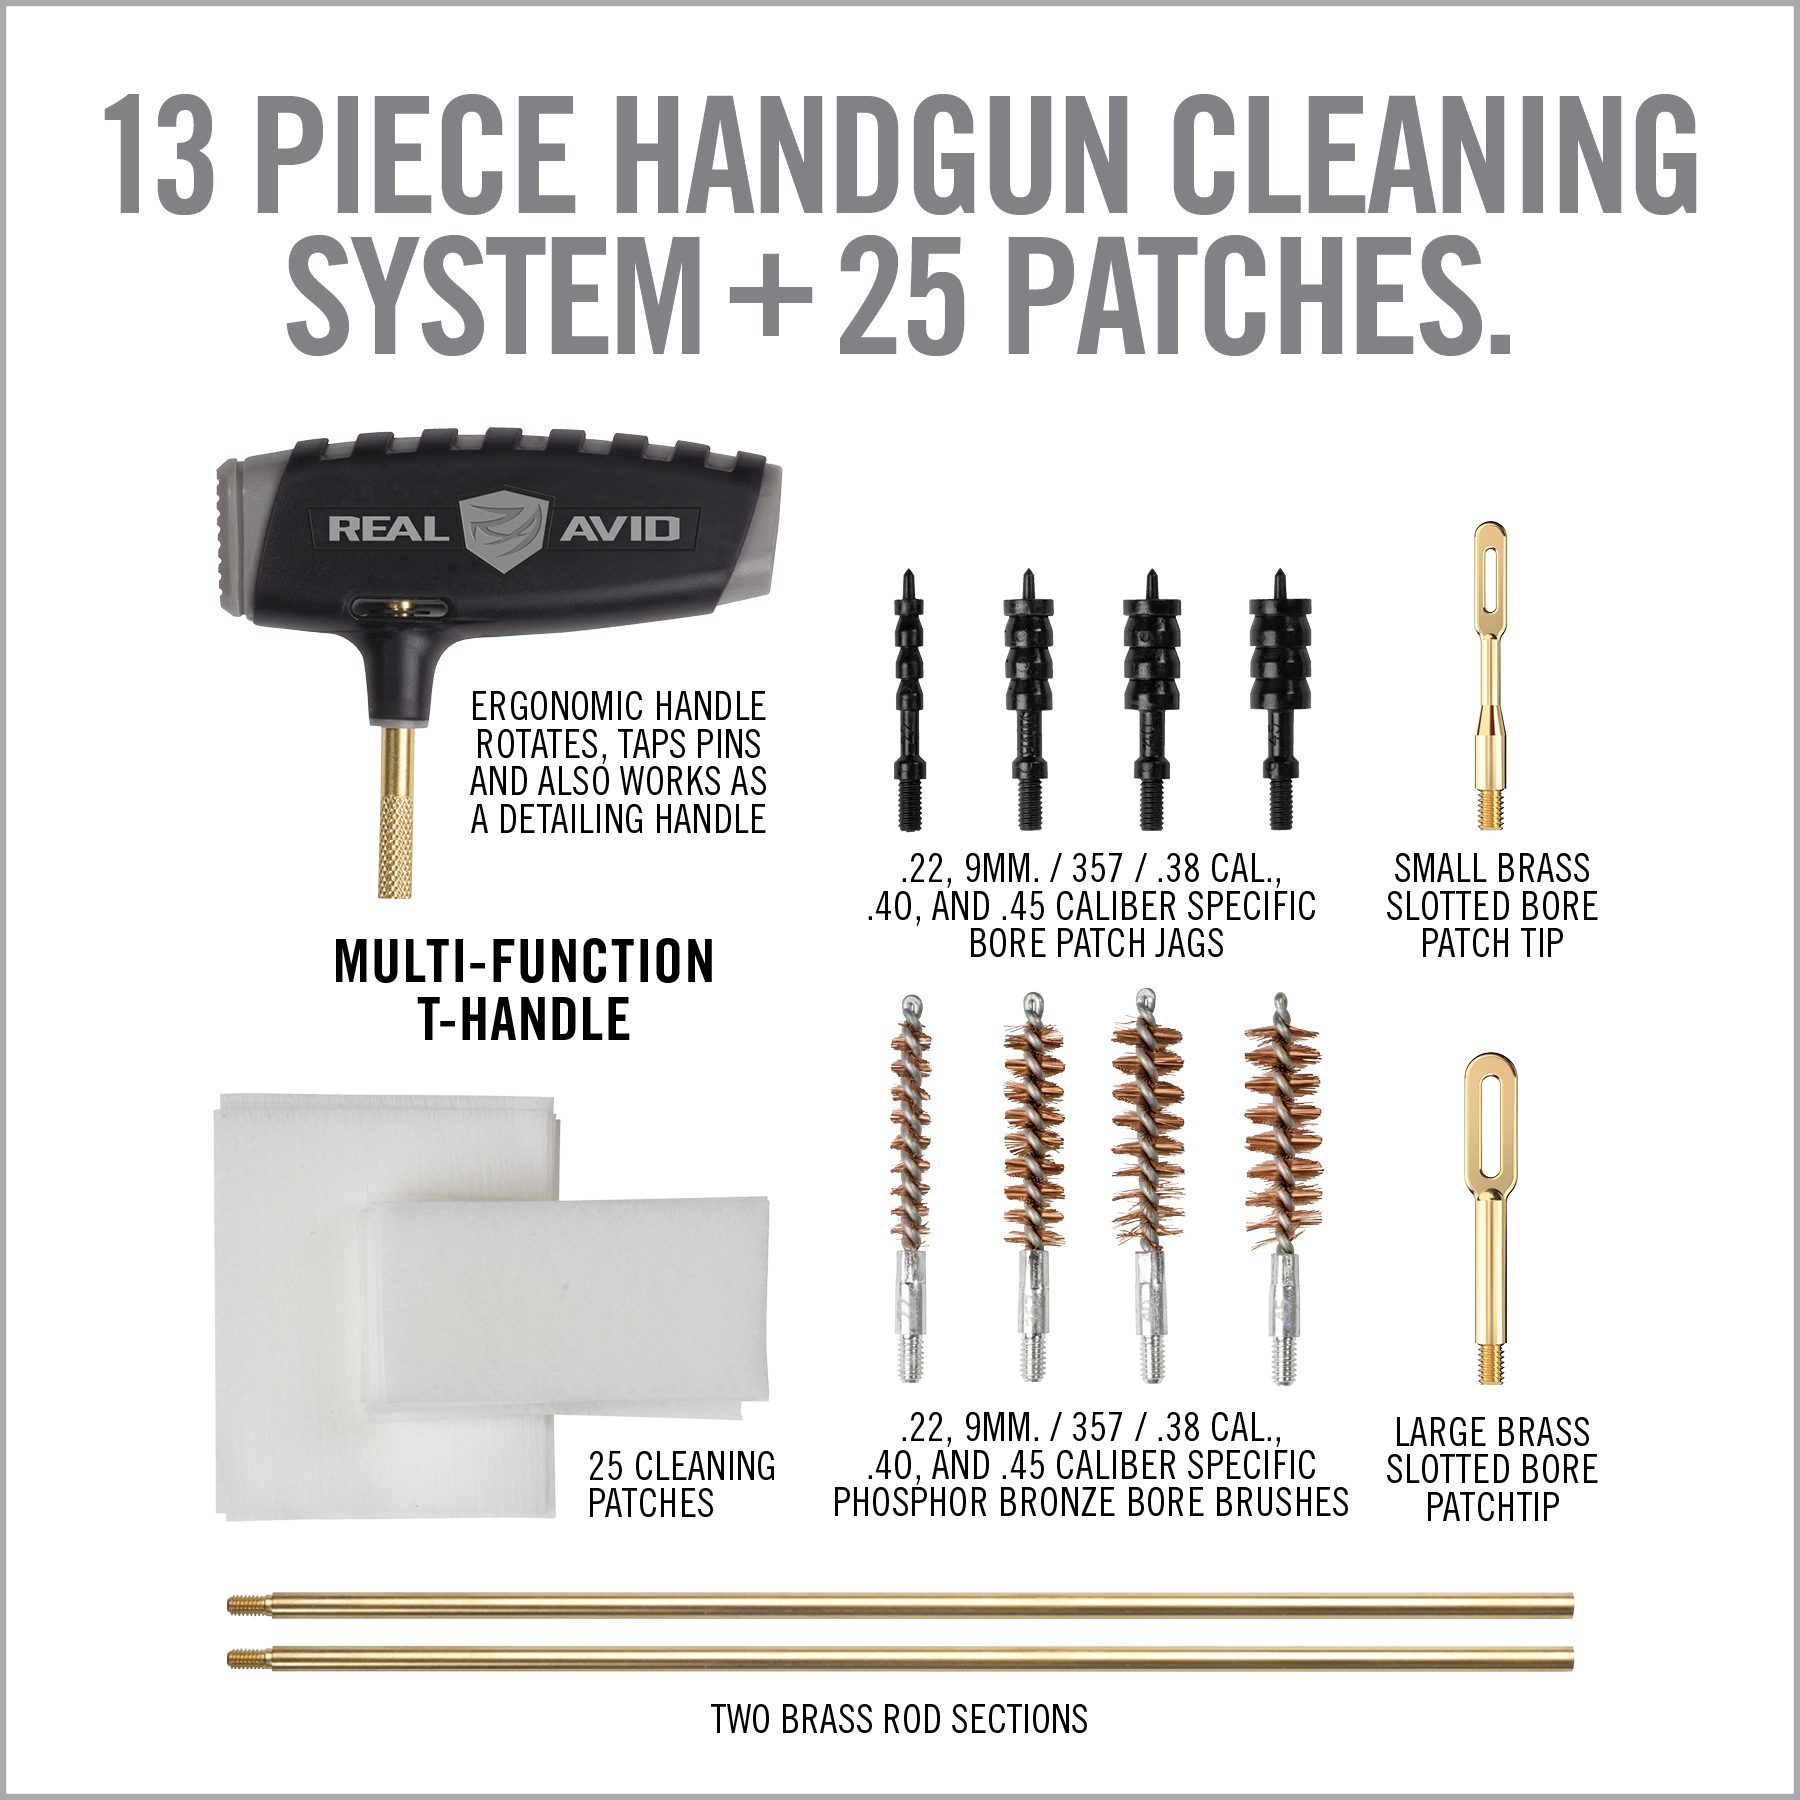 the instructions for how to clean and use hand gun cleaning system